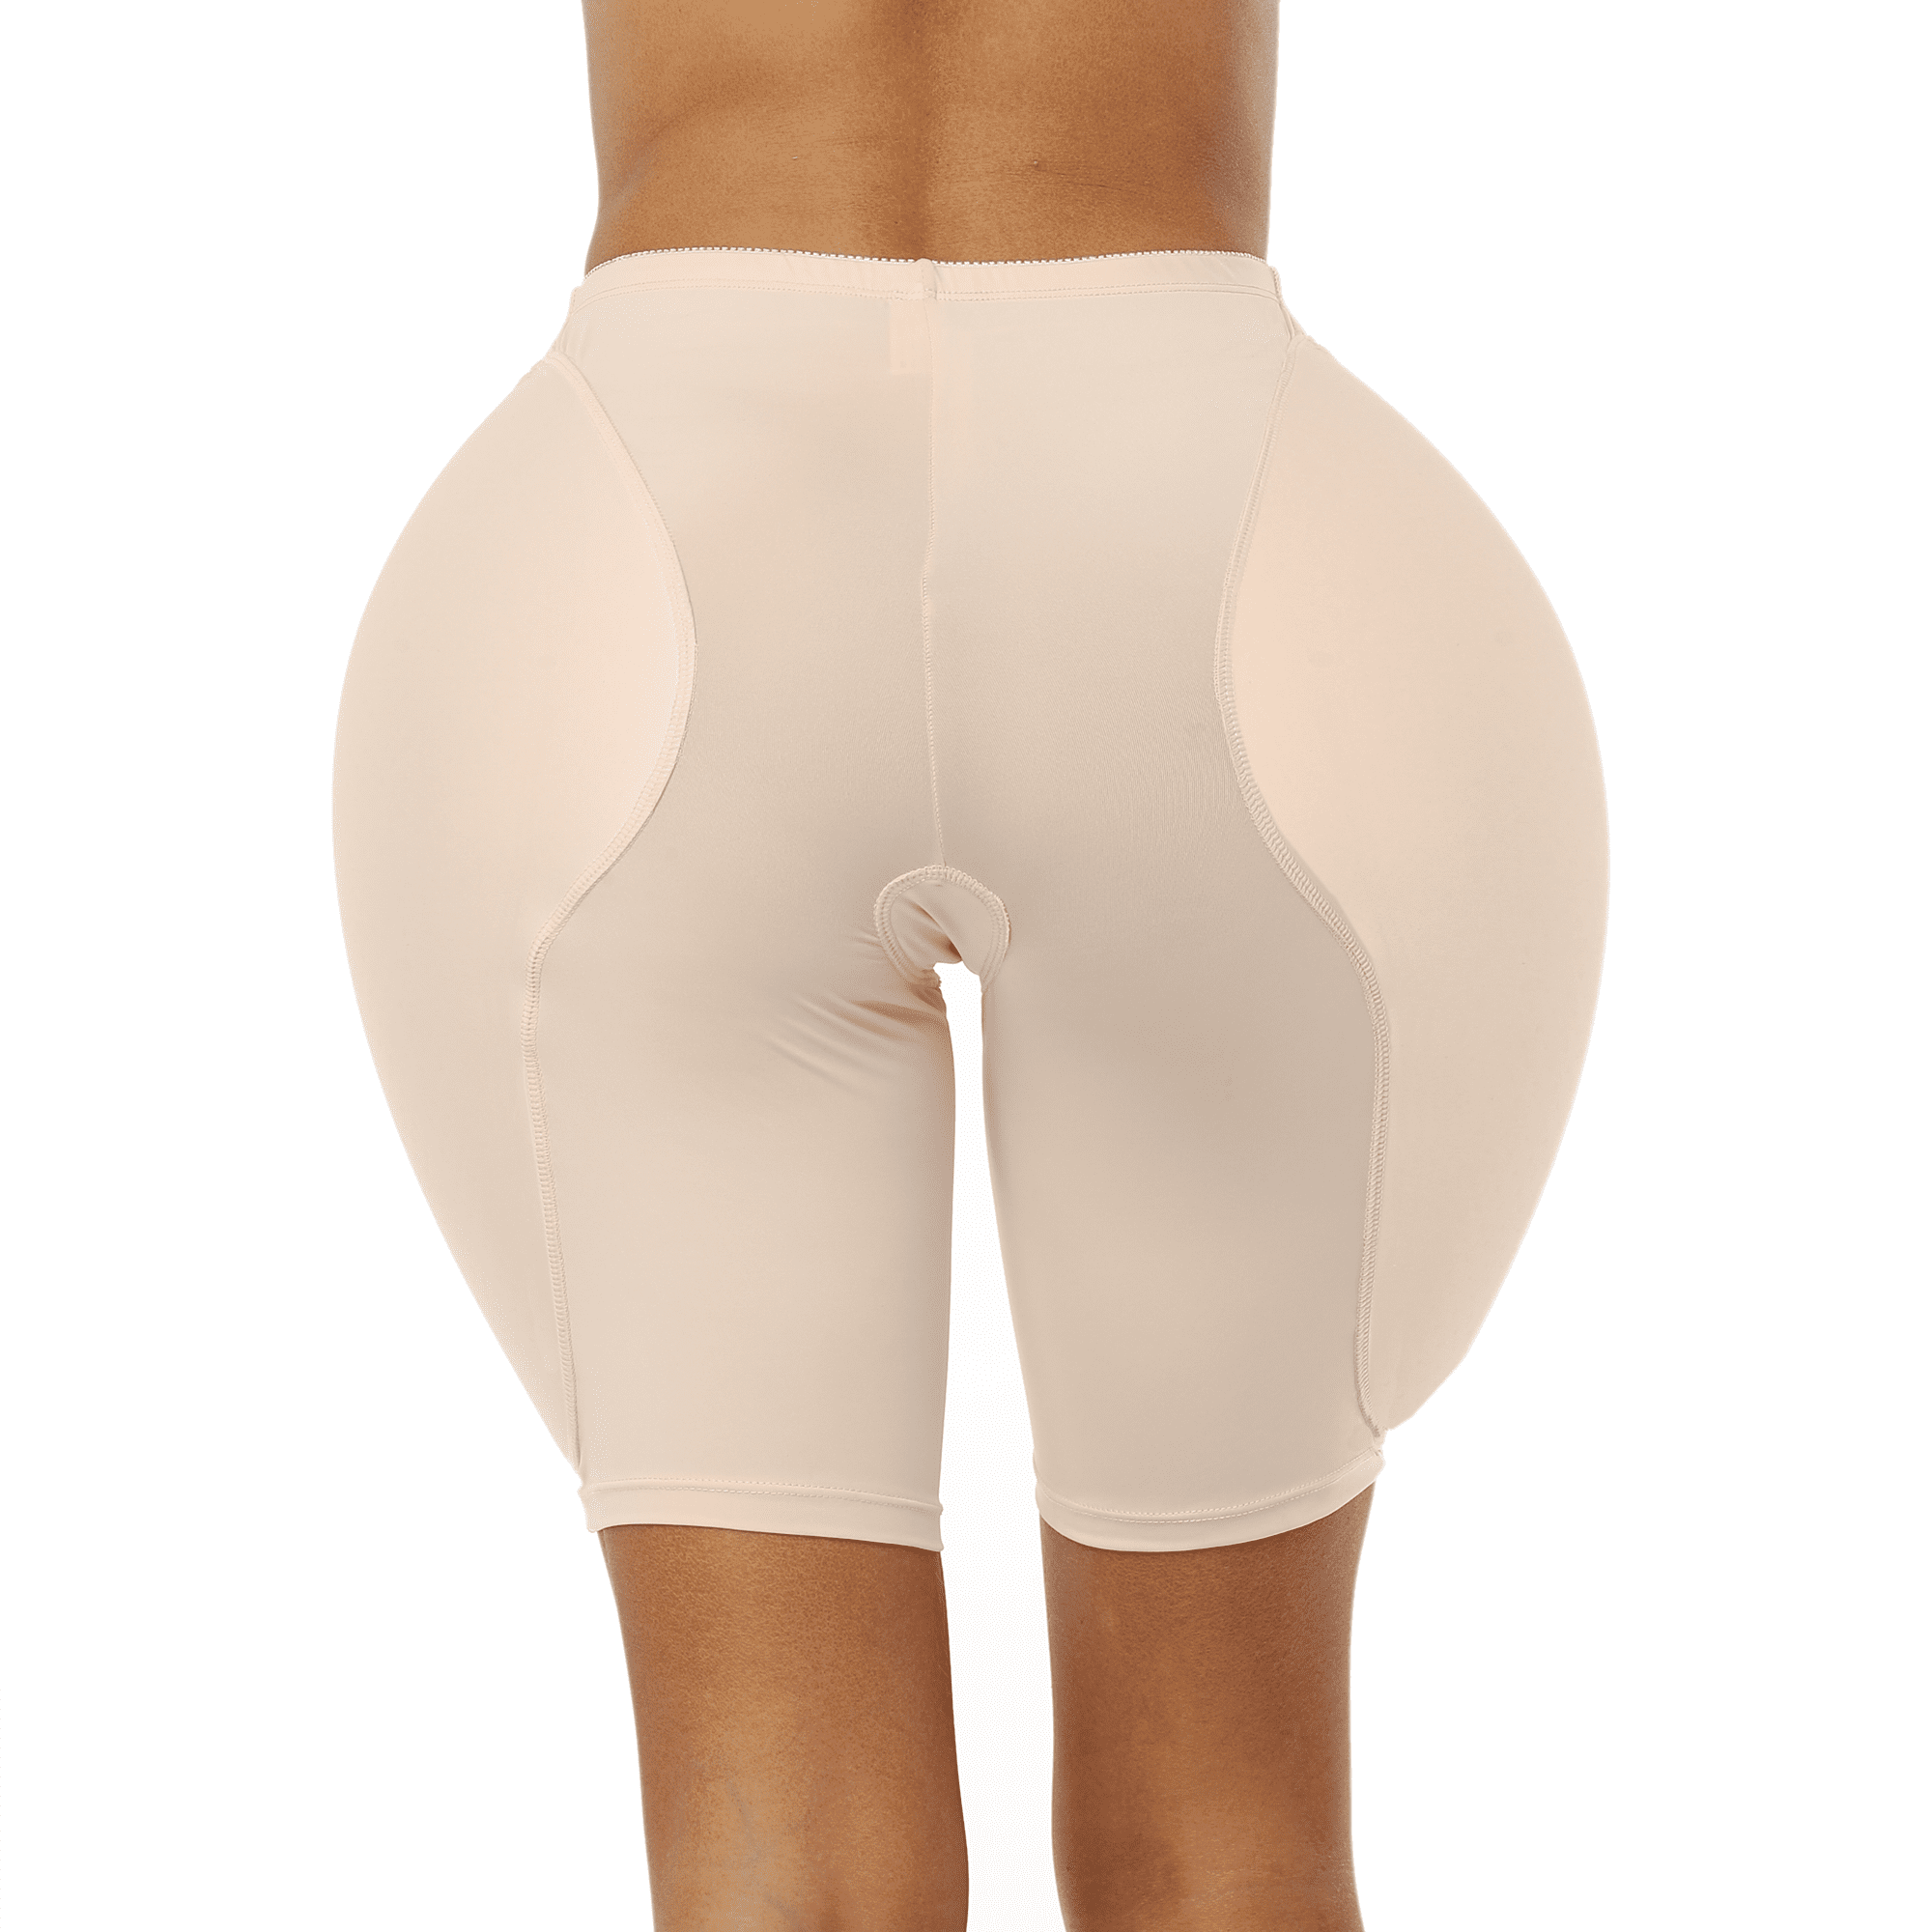 BIMEI 1-Pair Self-Adhesive Silicone Butt Pad Realistic Hip Pad Lifter  Enhancer Padded Inserts Soft Reusable for Unisex Push Up Silicone Padding,Beige,Meidum  